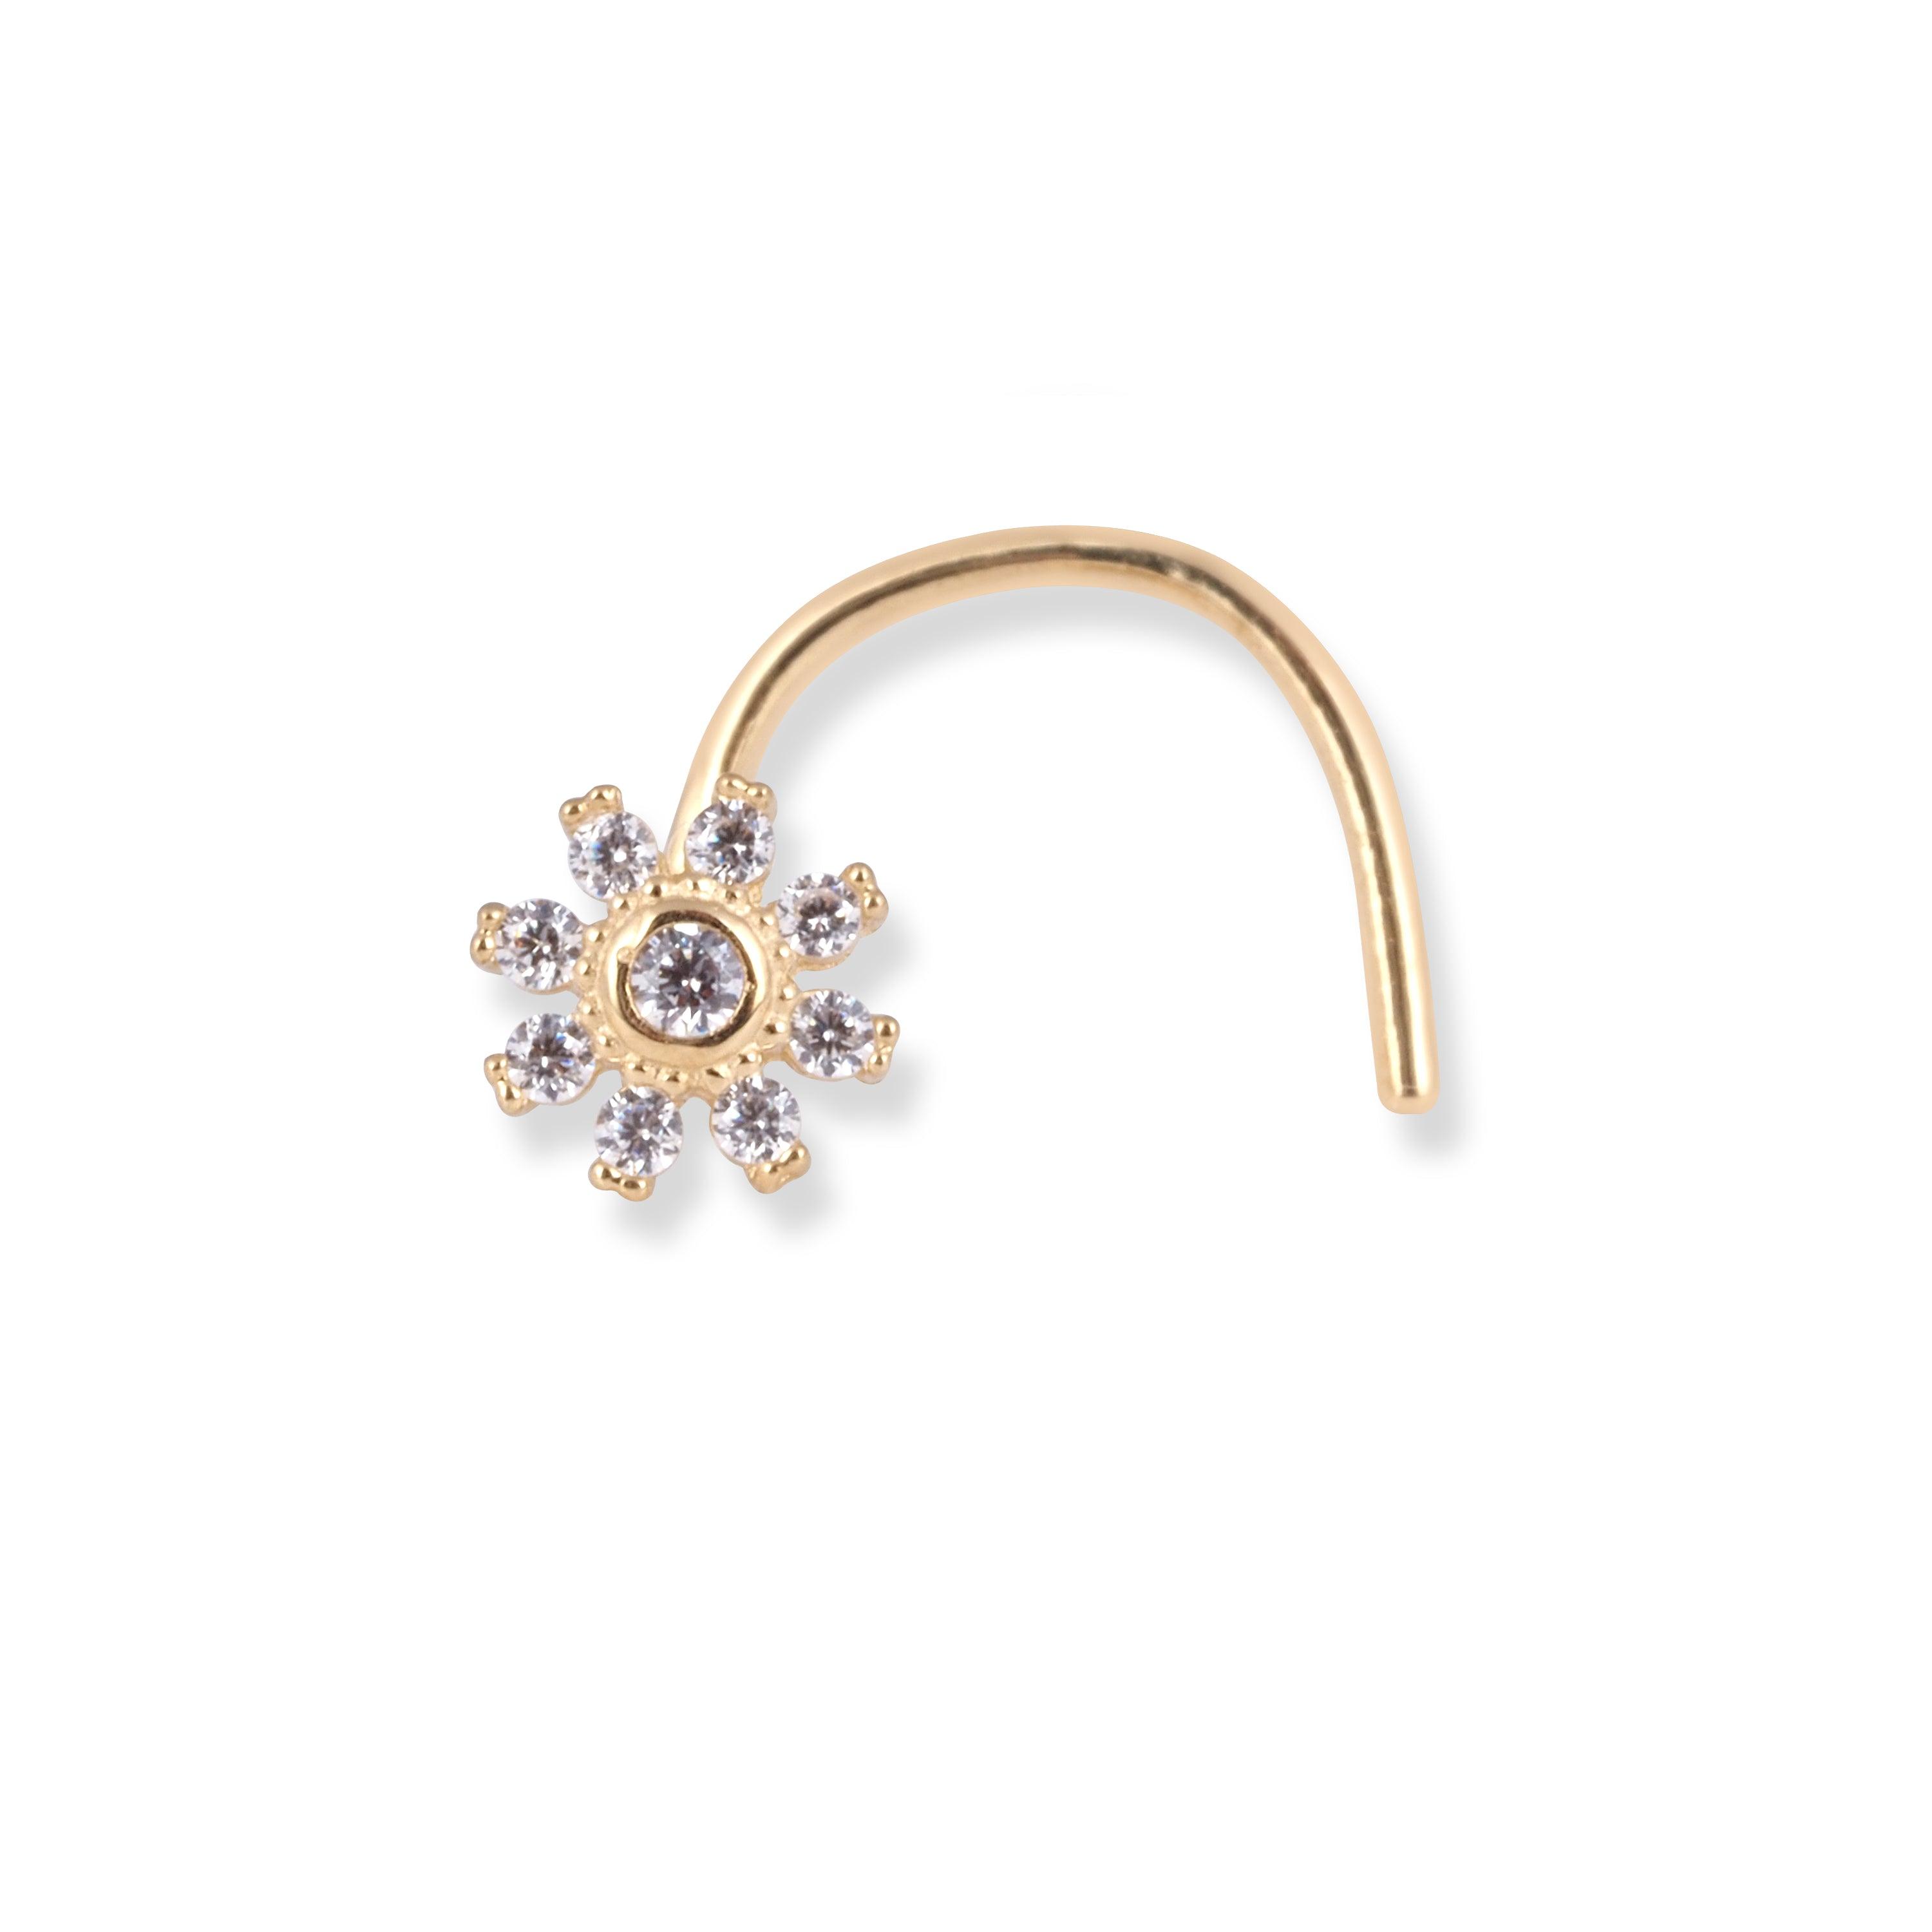 18ct Yellow Gold Flower Design Wire Back Nose Stud with 9 White Cubic Zirconia Stones NS-7570 - Minar Jewellers